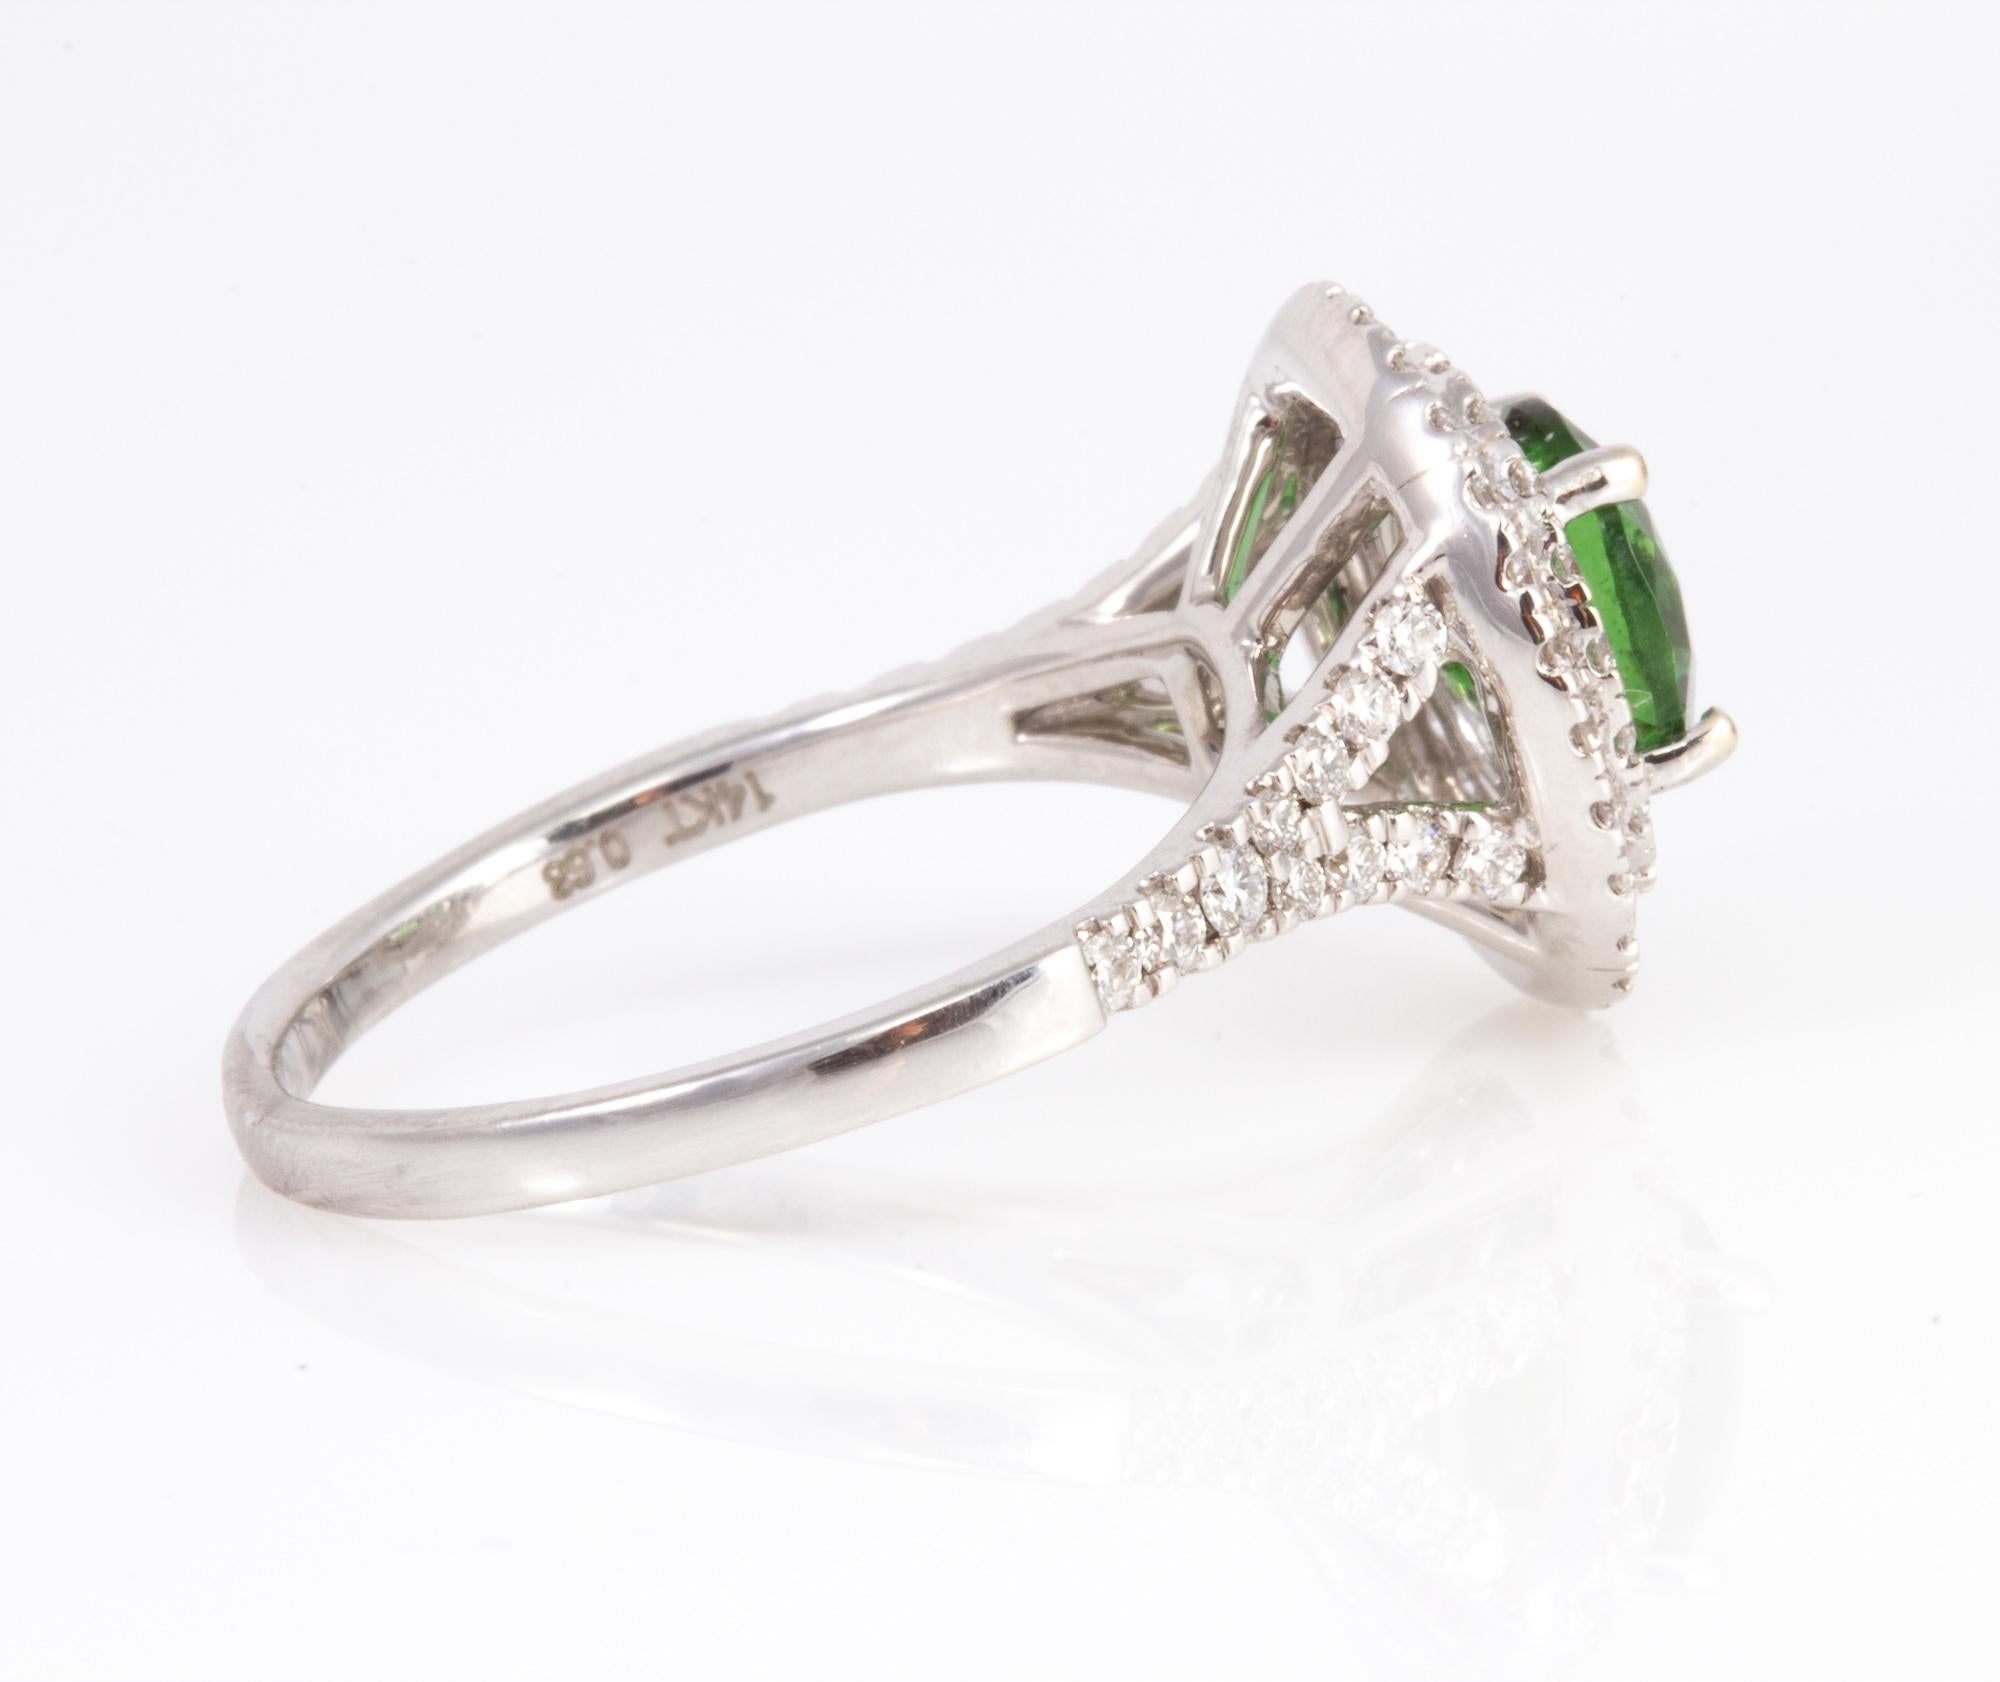 Exceptionally Well Cut 1.26 Carat Chrome Tourmaline and Diamond Ring For Sale 2